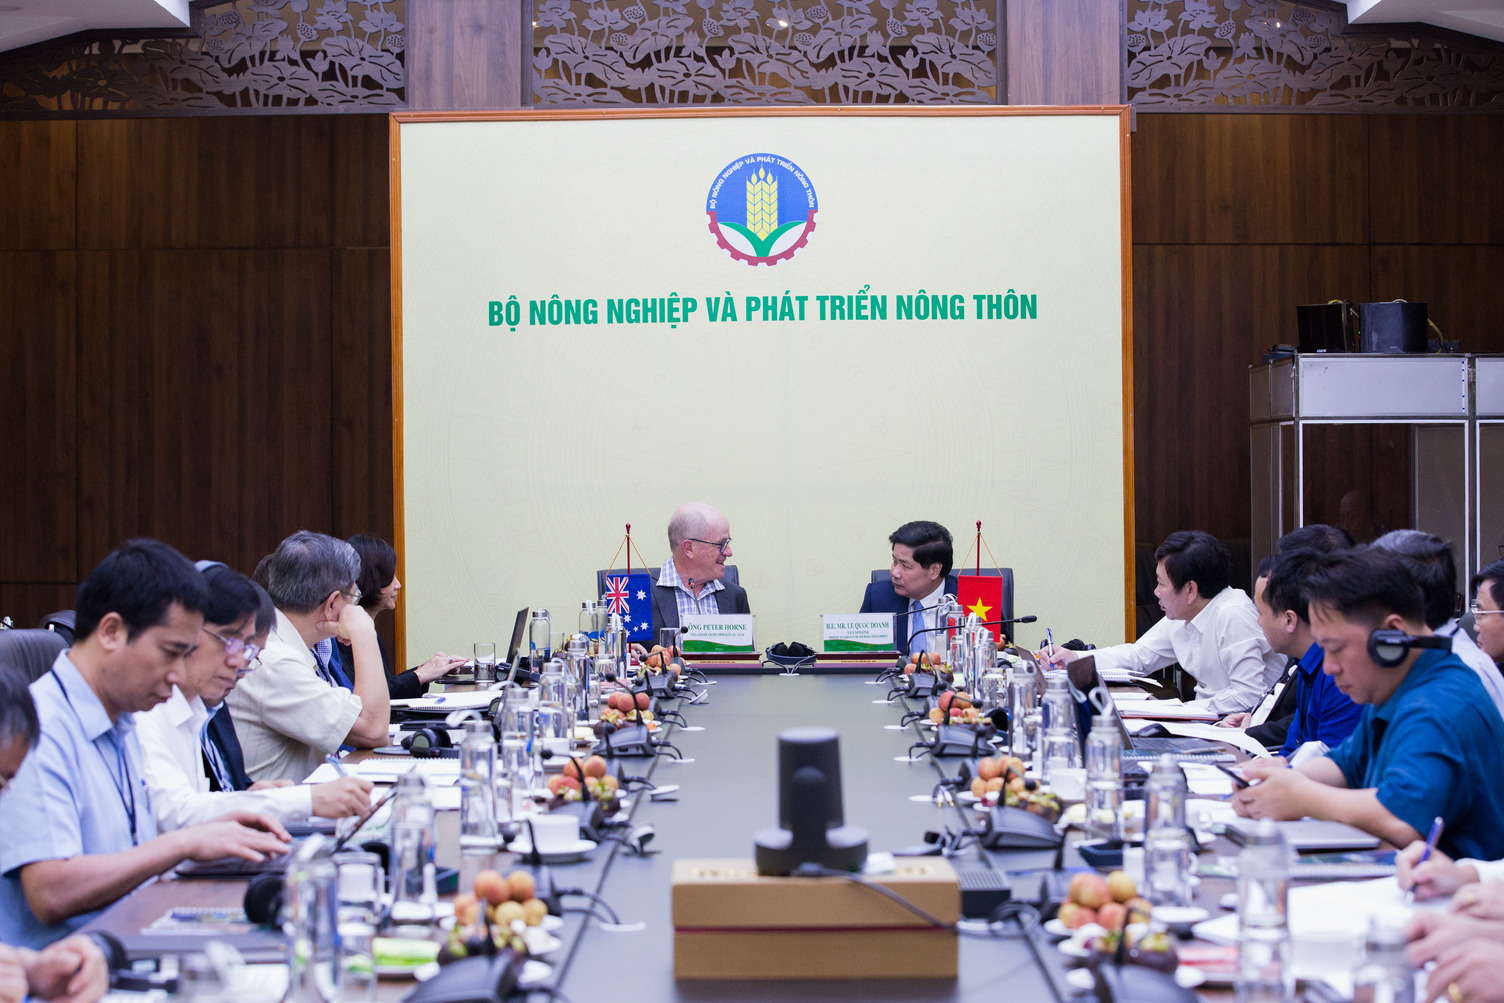 The mid-term review of ACIAR-Vietnam research collaboration strategy was co-chaired by Dr Peter Horne, ACIAR’s Country Partnerships General Manager and Dr Le Quoc Doanh, Vietnam’s Vice Minister of Agriculture and Rural Development. Photo: Khanh Long for ACIAR Vietnam.